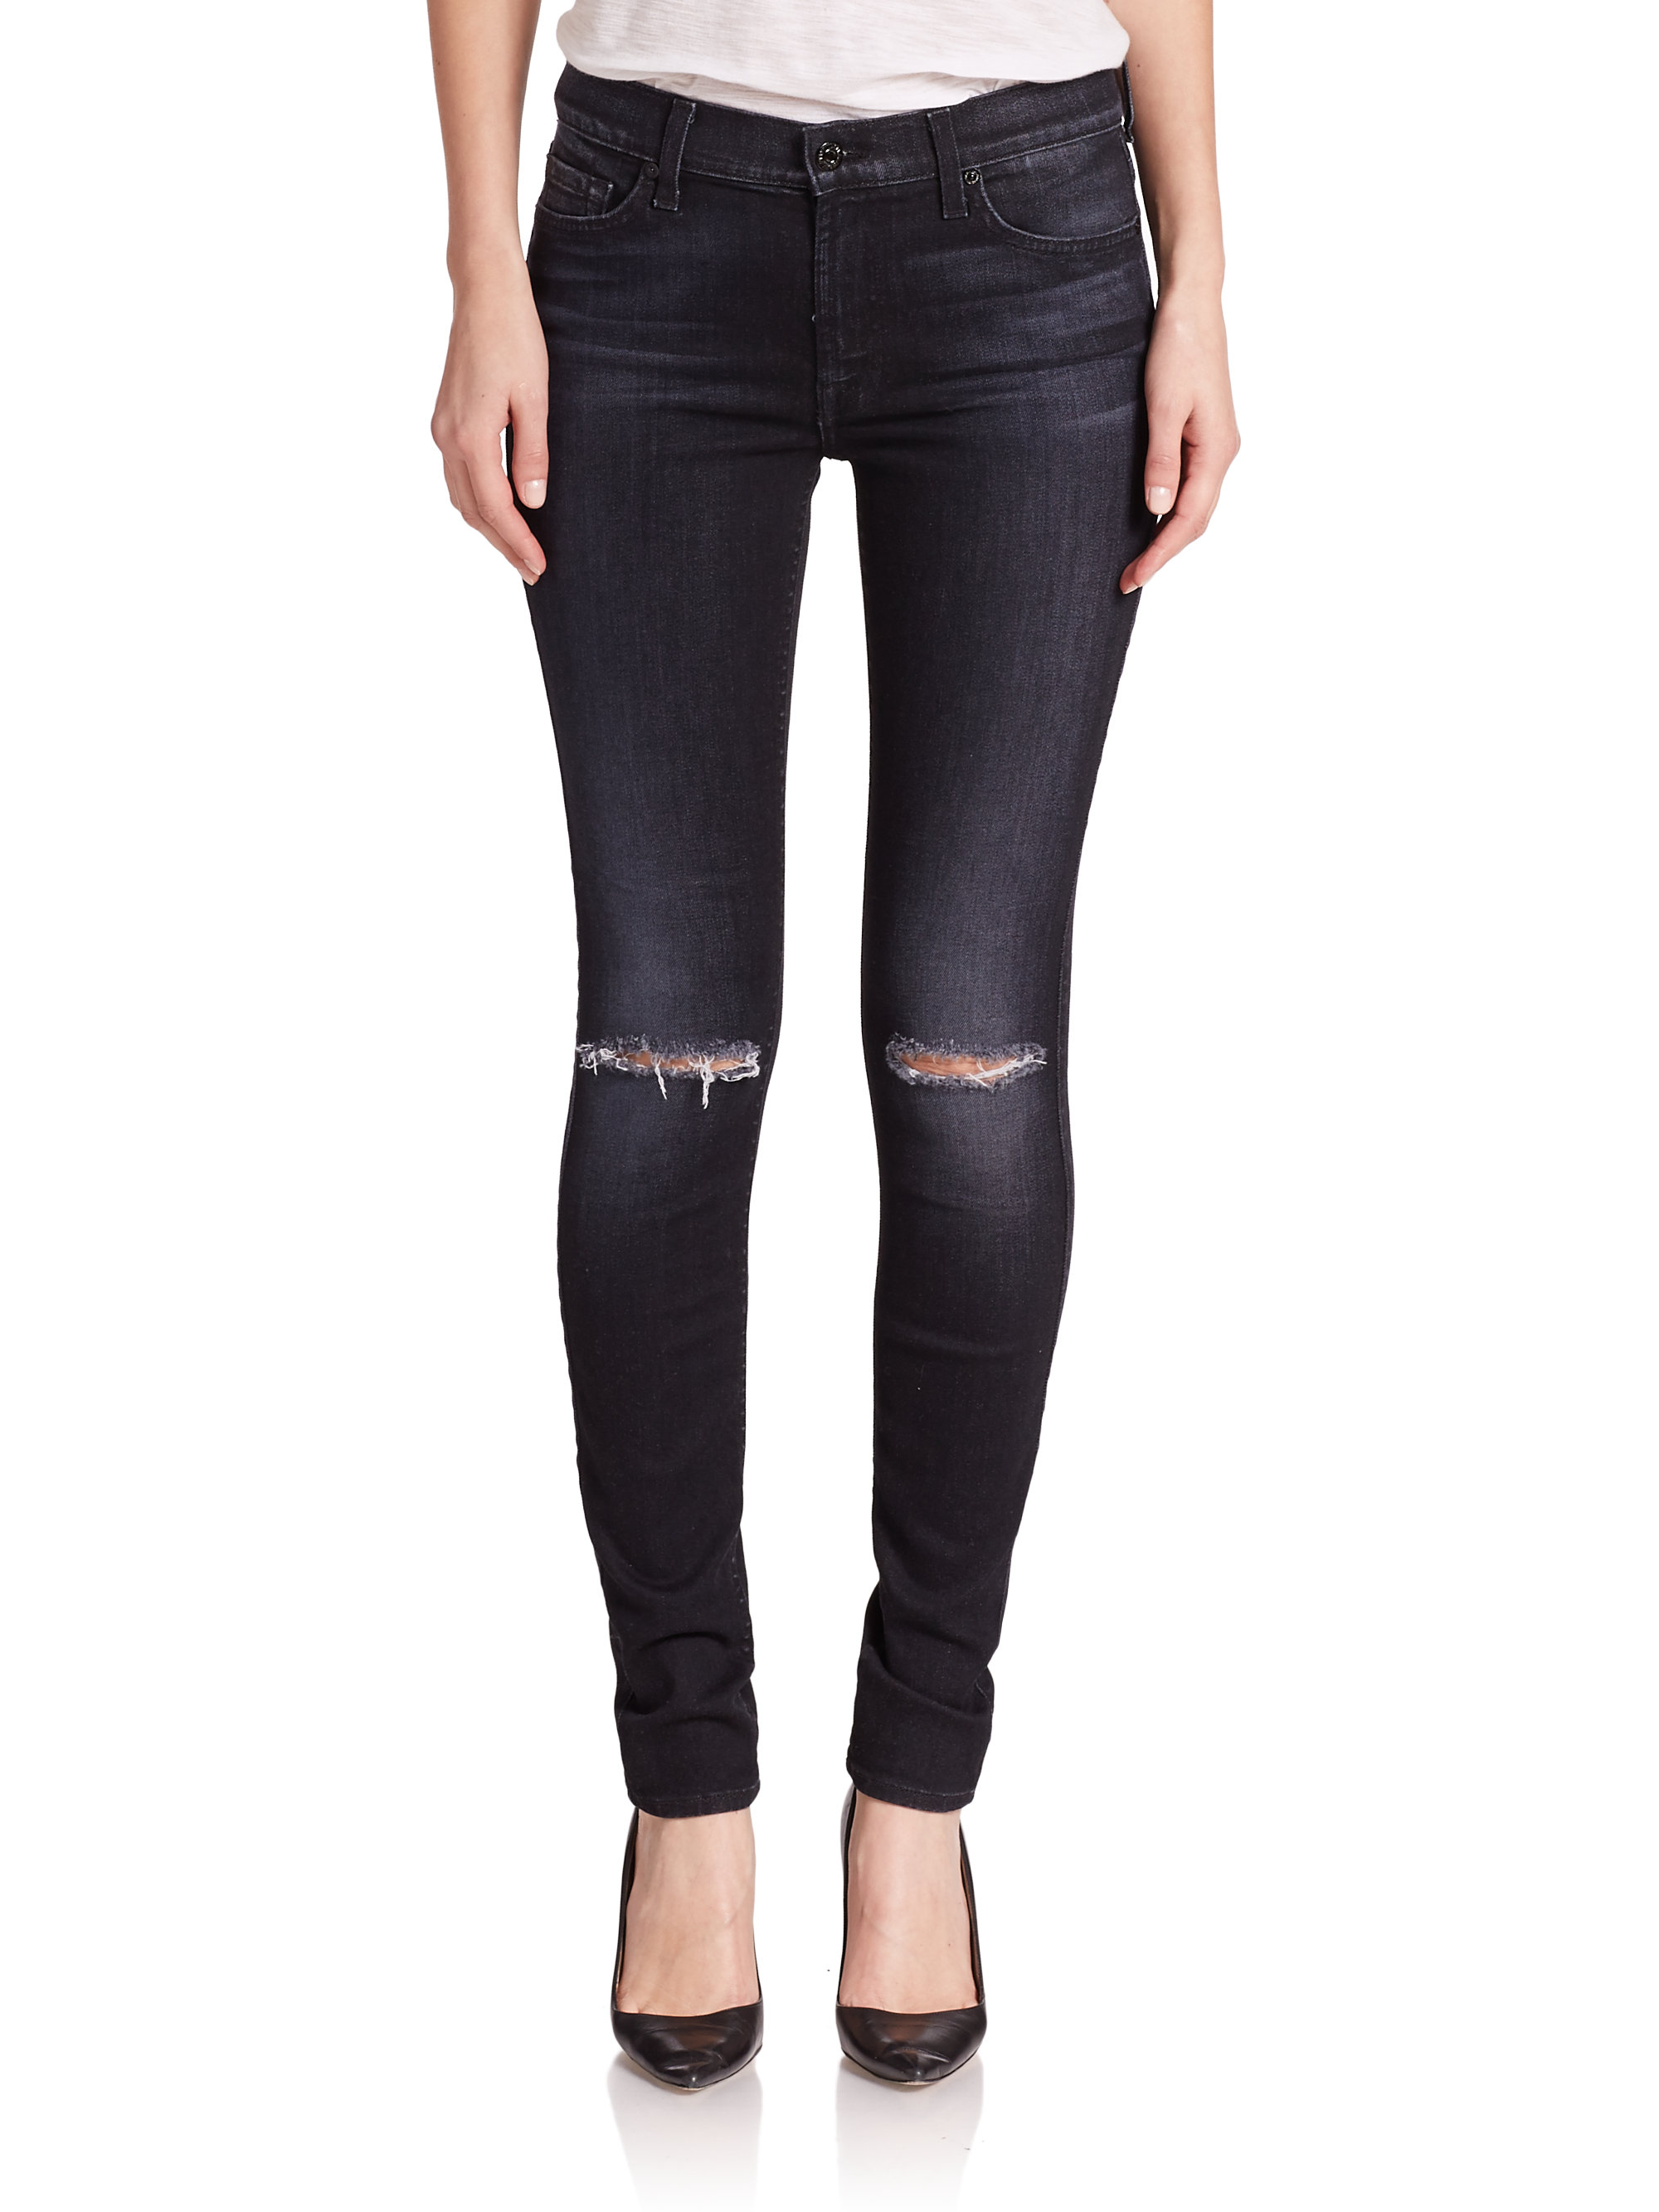 Lyst - 7 For All Mankind Distressed Skinny Jeans in Black